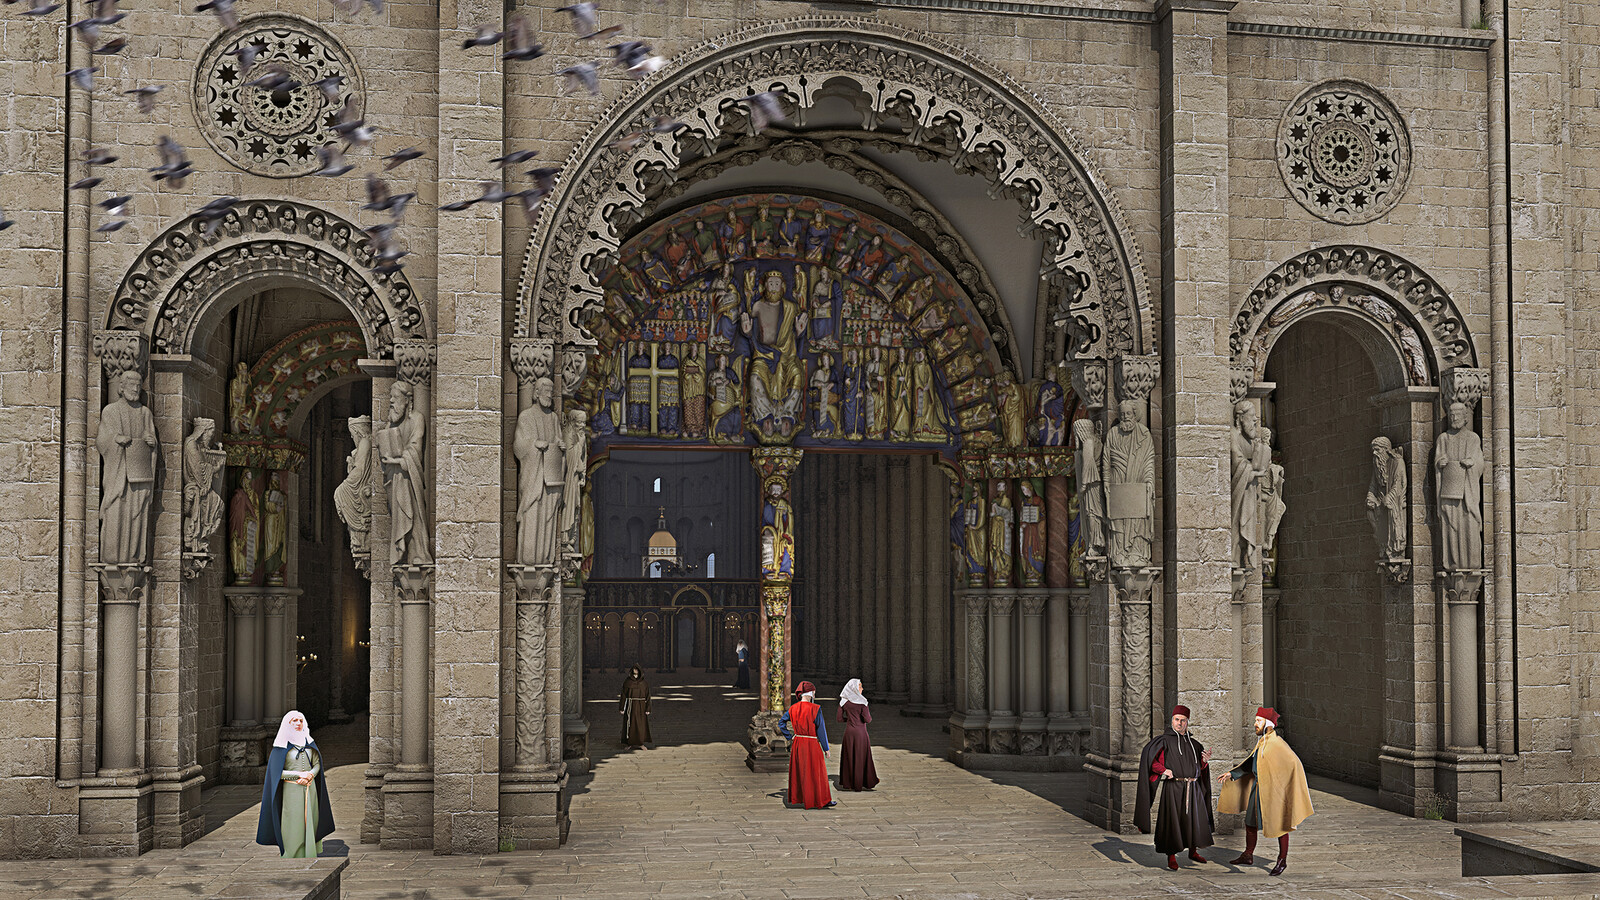 Main entrance with the Portal of Glory (updated version)